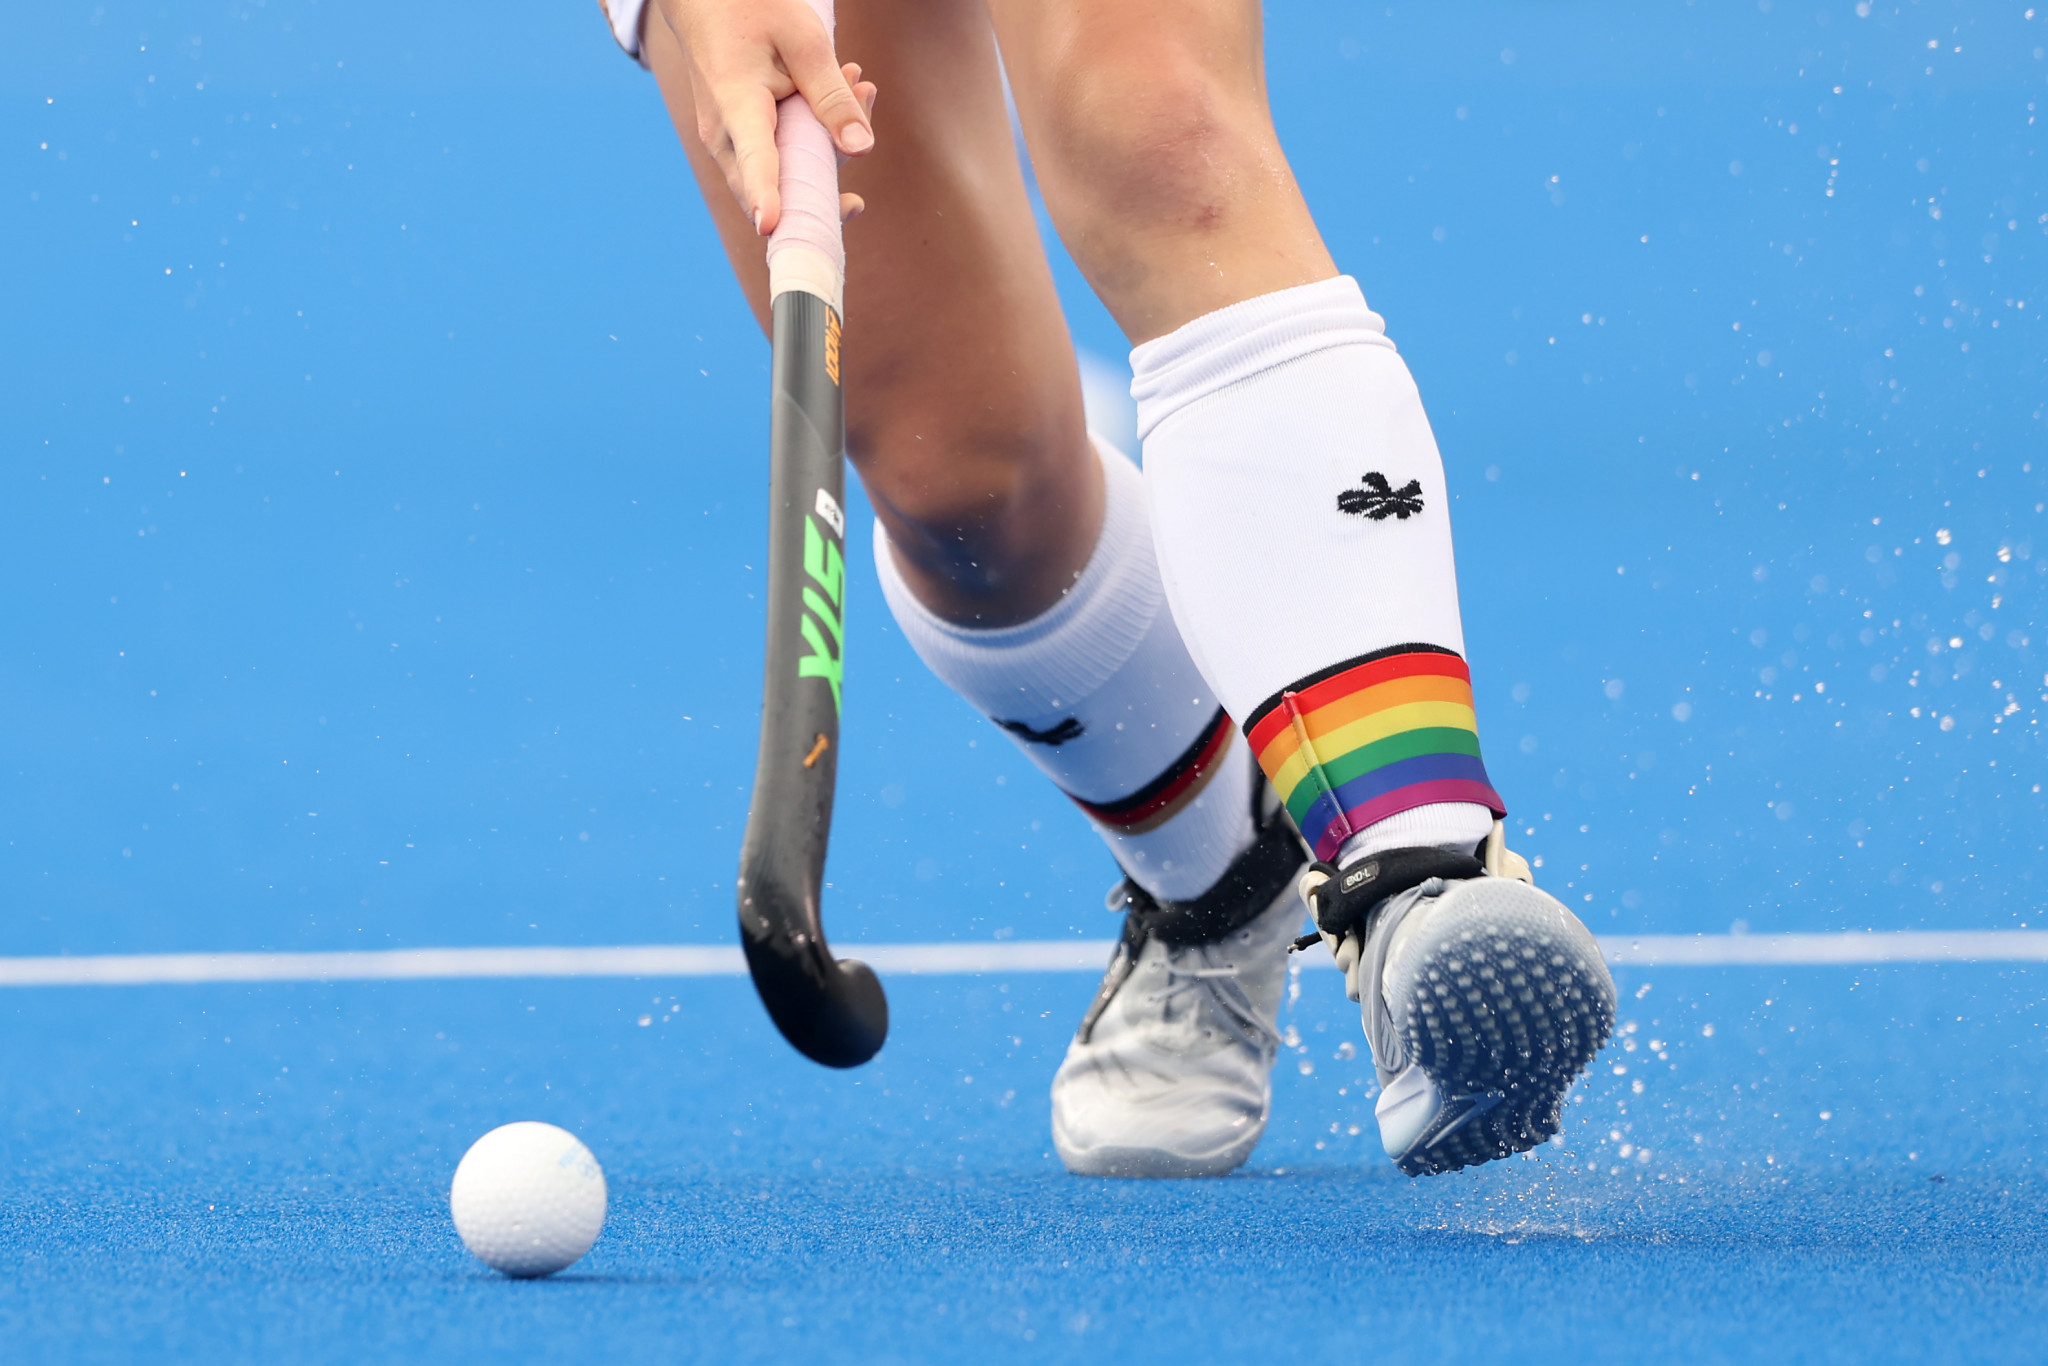 Users are responsible for everything from team tactics to stadium development in FIH Hockey Manager ©Getty Images